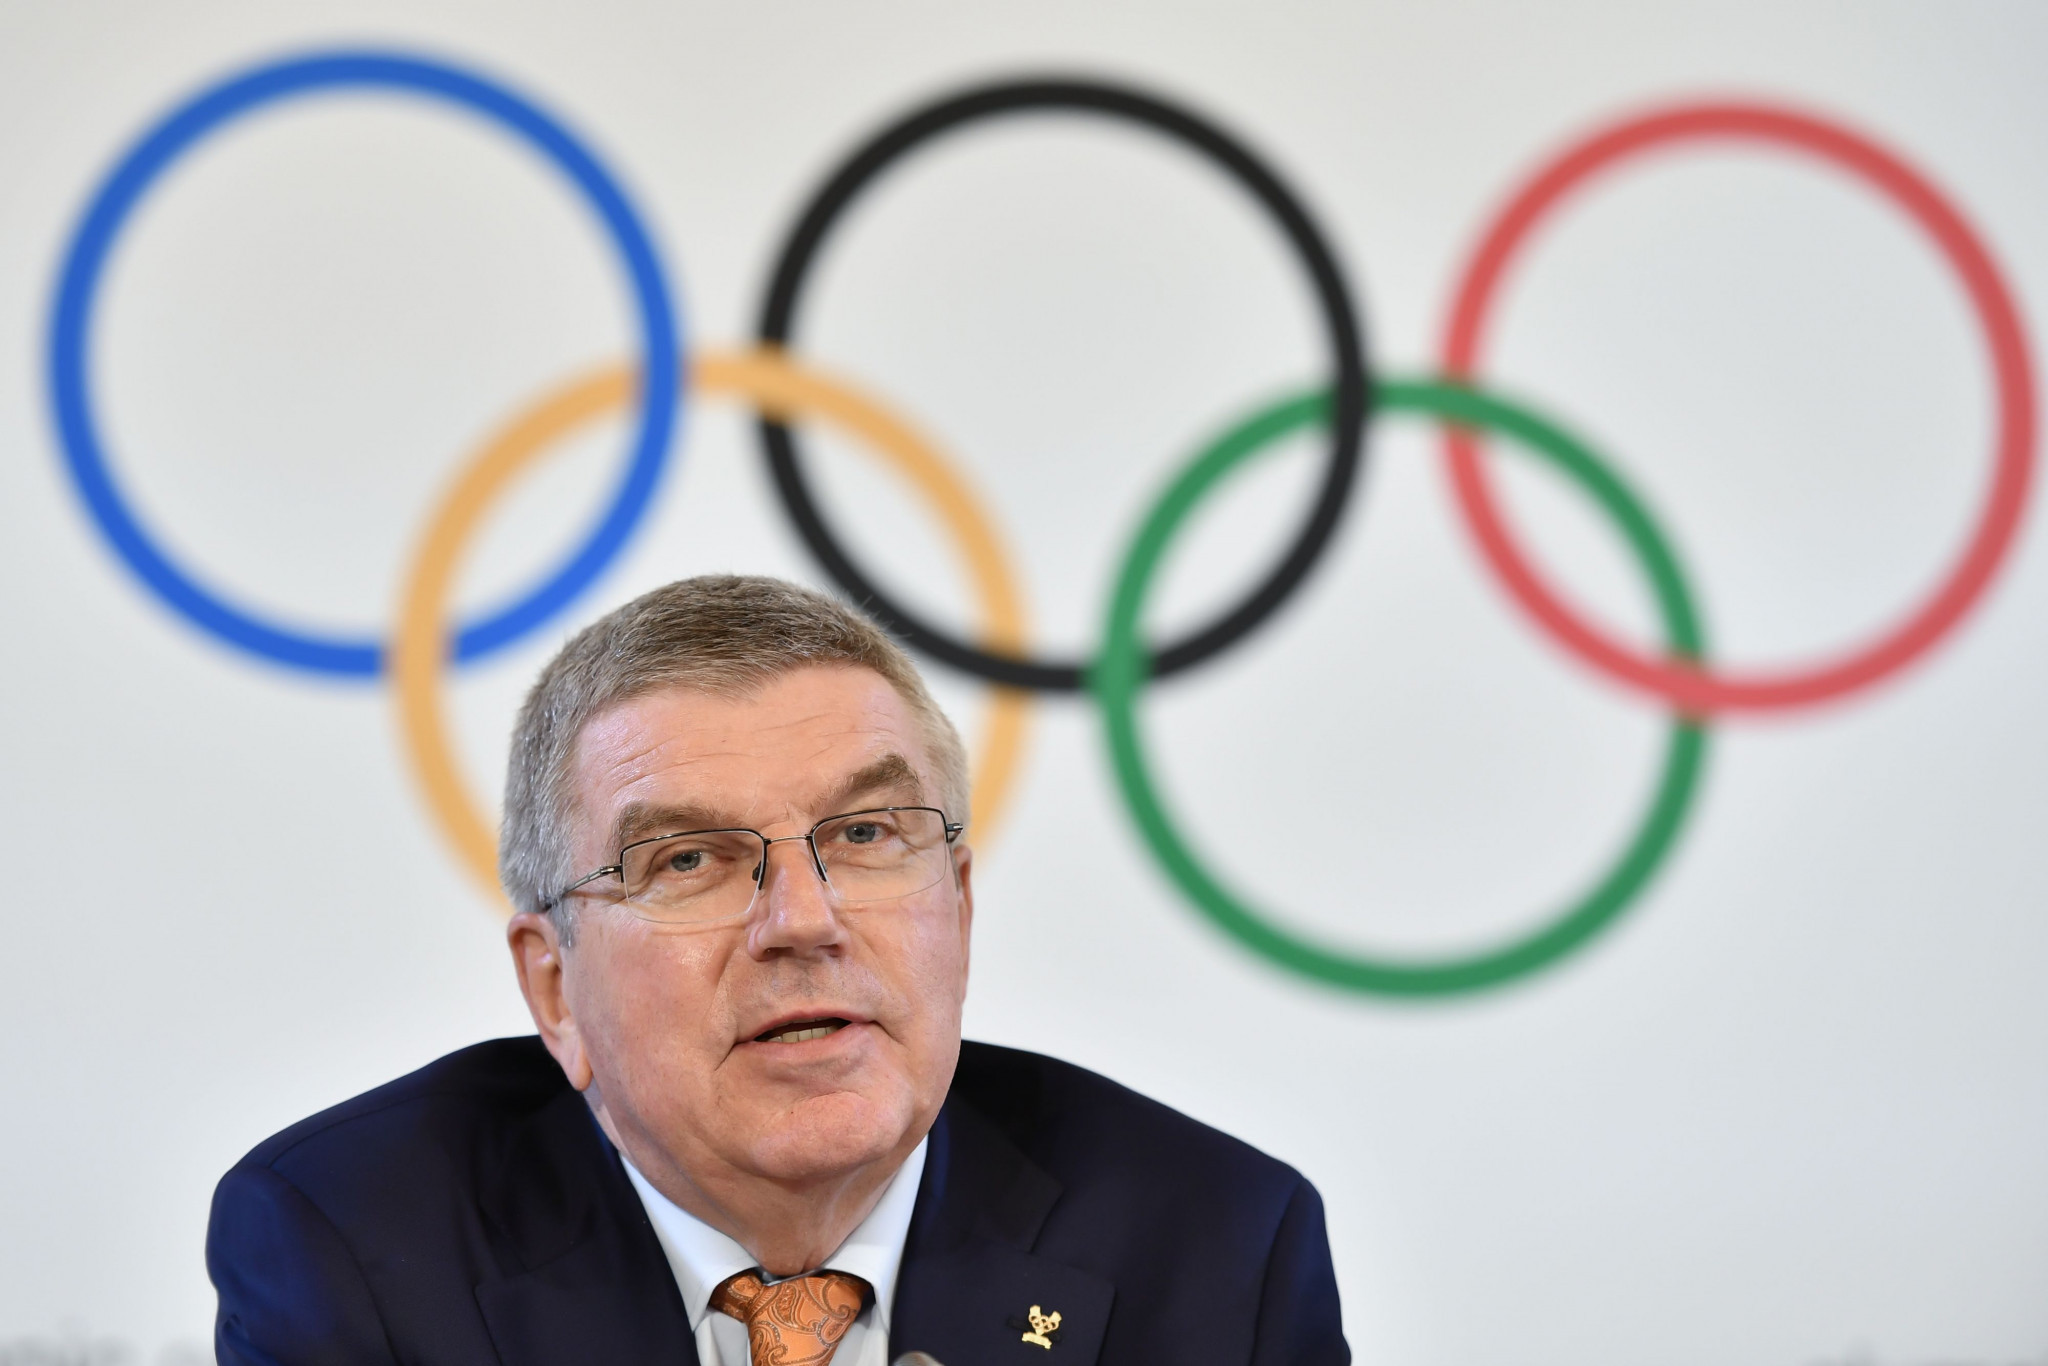 IOC President Thomas Bach will attend the G20 summit in Osaka next week ©Getty Images